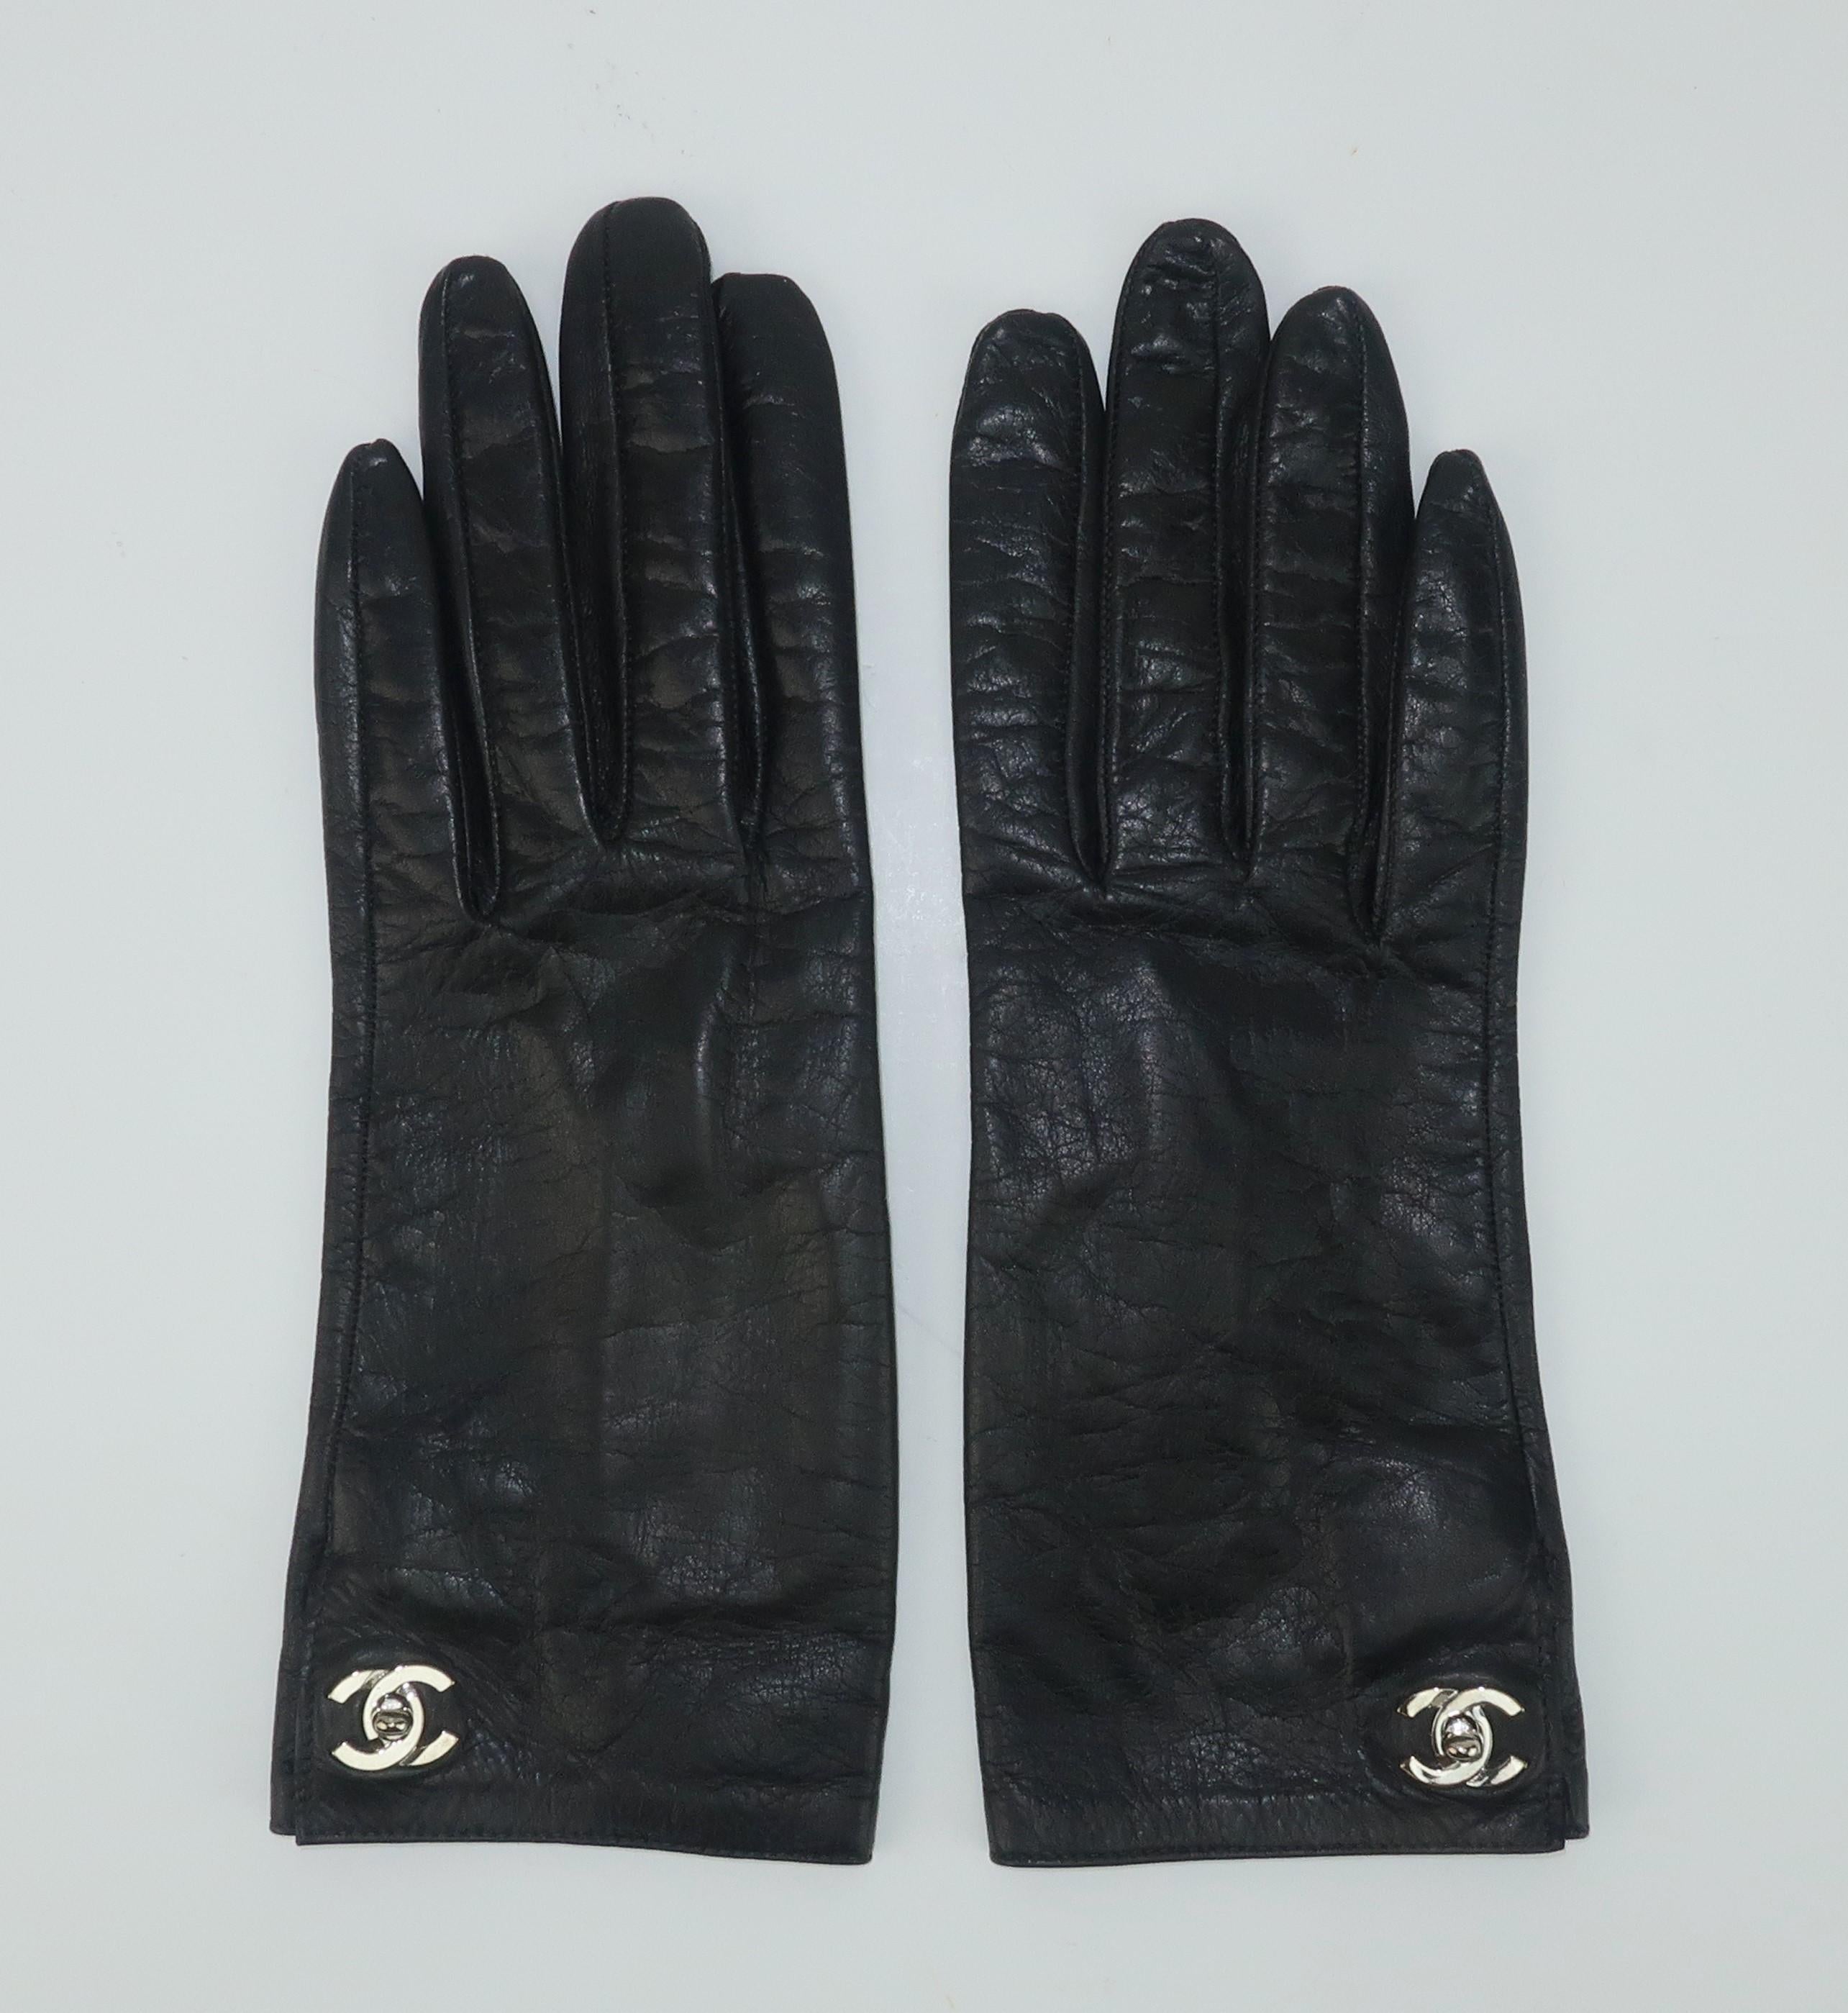 Chanel black leather gloves with a unique silver logo turn lock closure at the wrist.  Lined in silk and accompanied by the original box with felt cloth.
CONDITION
Very good condition with some light indications of previous wear.  The box shows wear